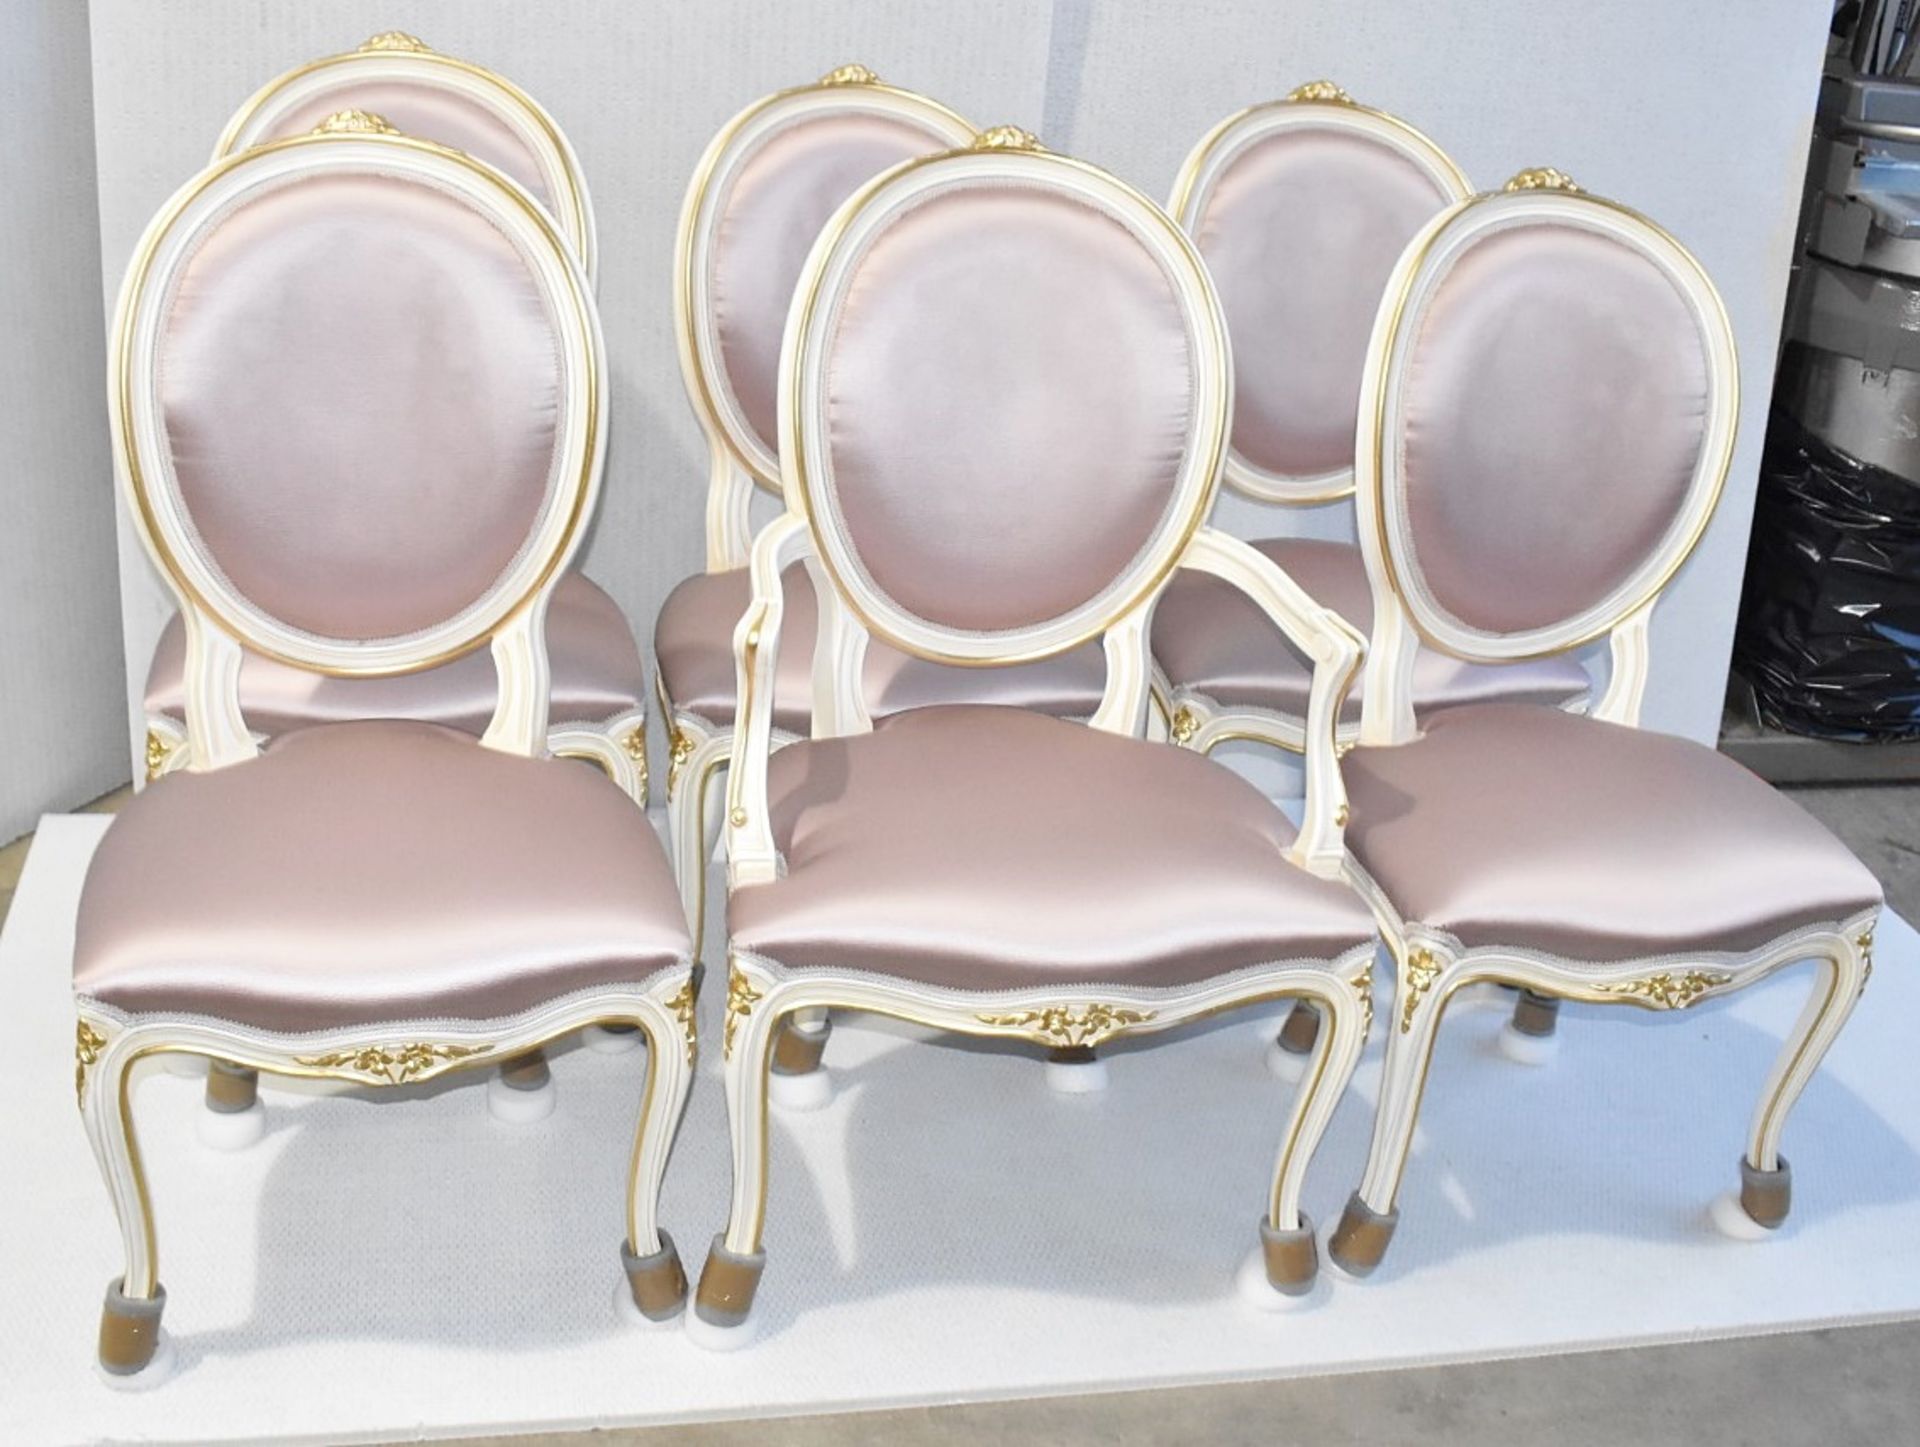 Set of 6 x ANGELO CAPPELLINI 'Timeless' Baroque-style Carved Dining Chairs, Upholstered in Pink Silk - Image 13 of 15